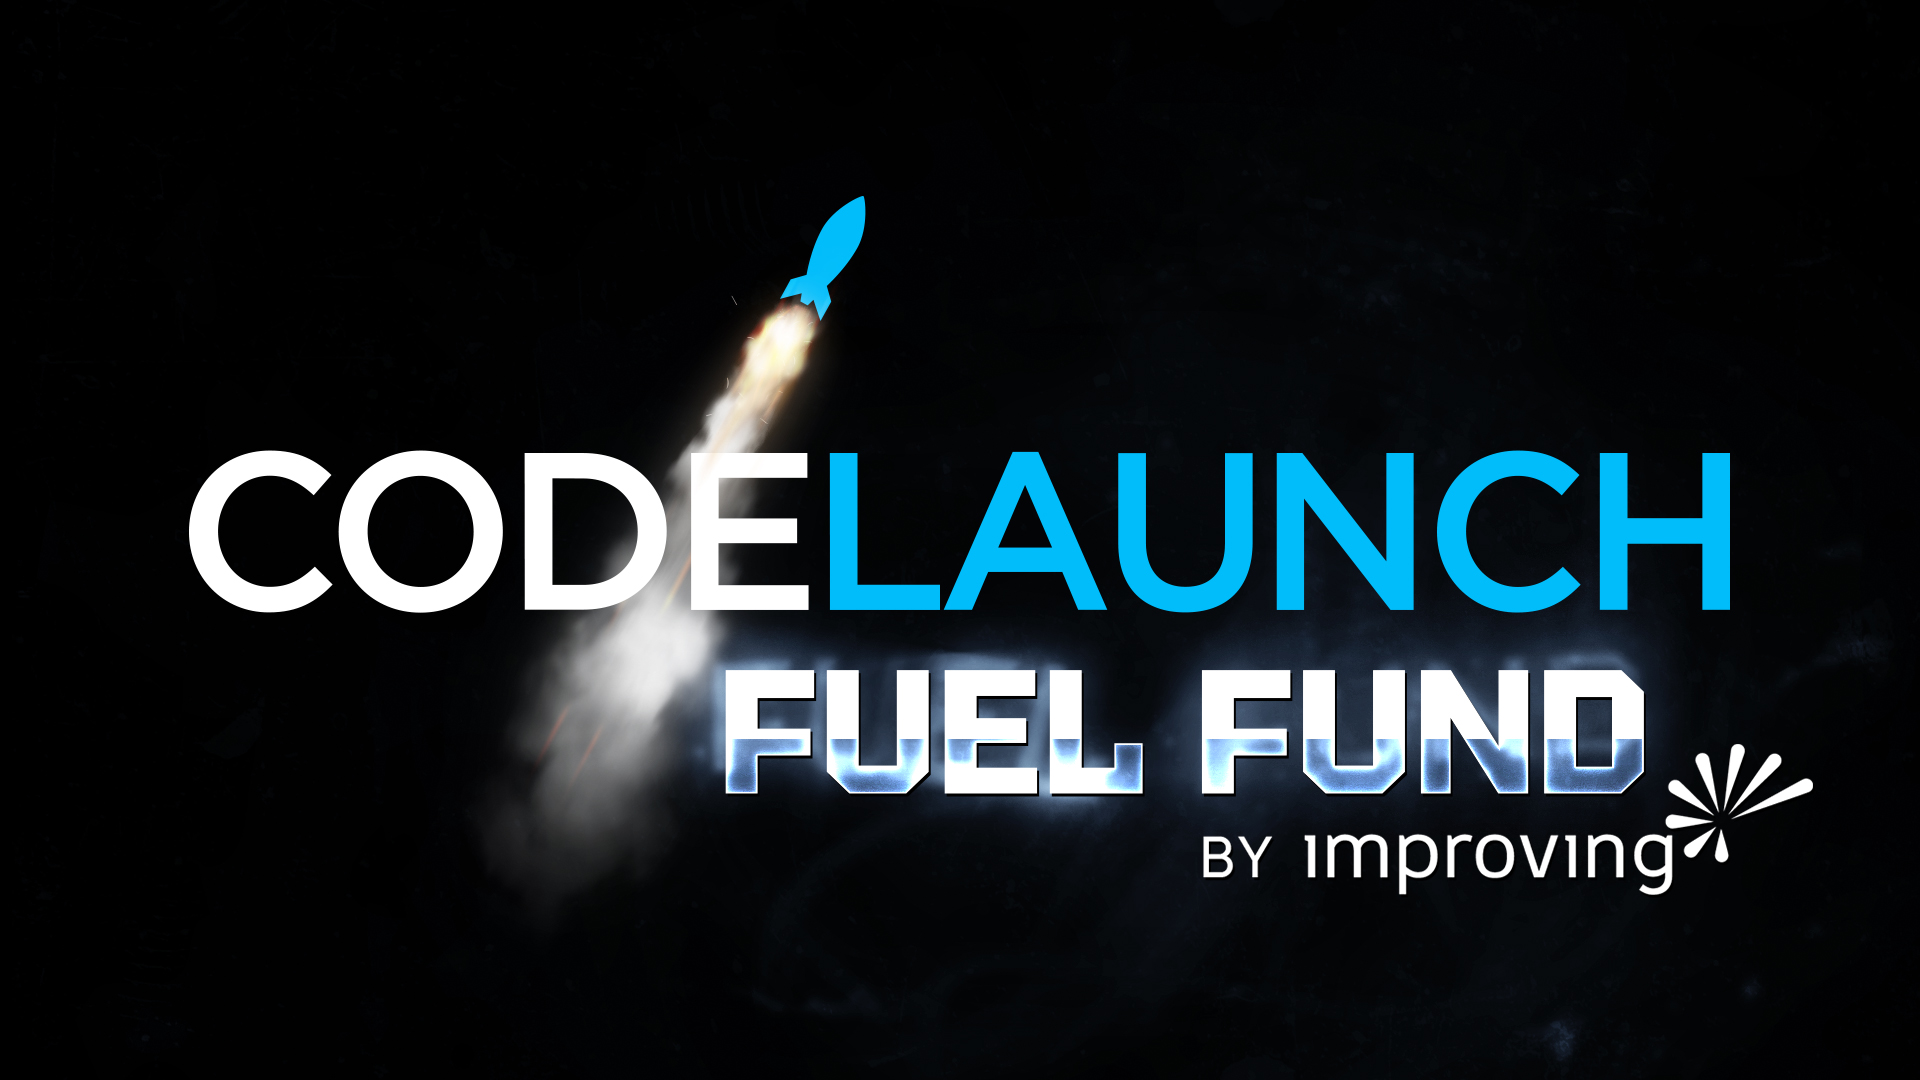 CodeLaunch Makes First Investments Using the CodeLaunch Fuel Fund 